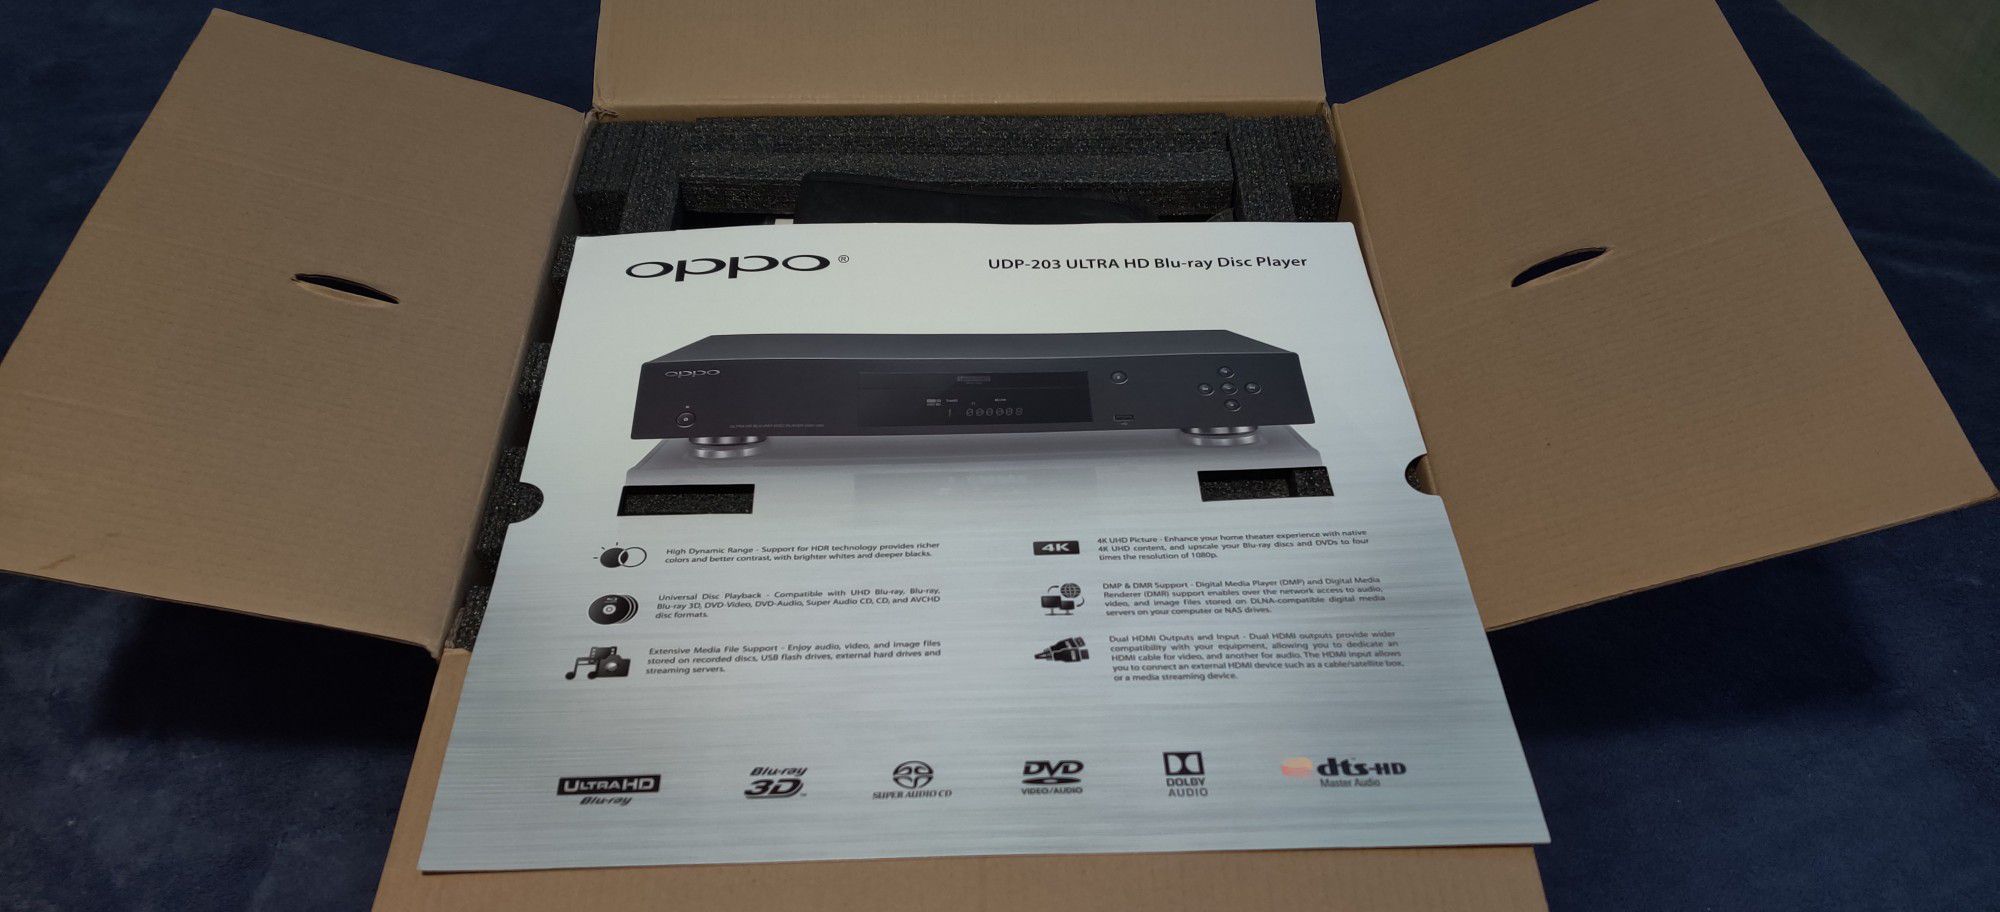 OPPO UDP-203 Ultra HD Blu-ray Disc Player ￼